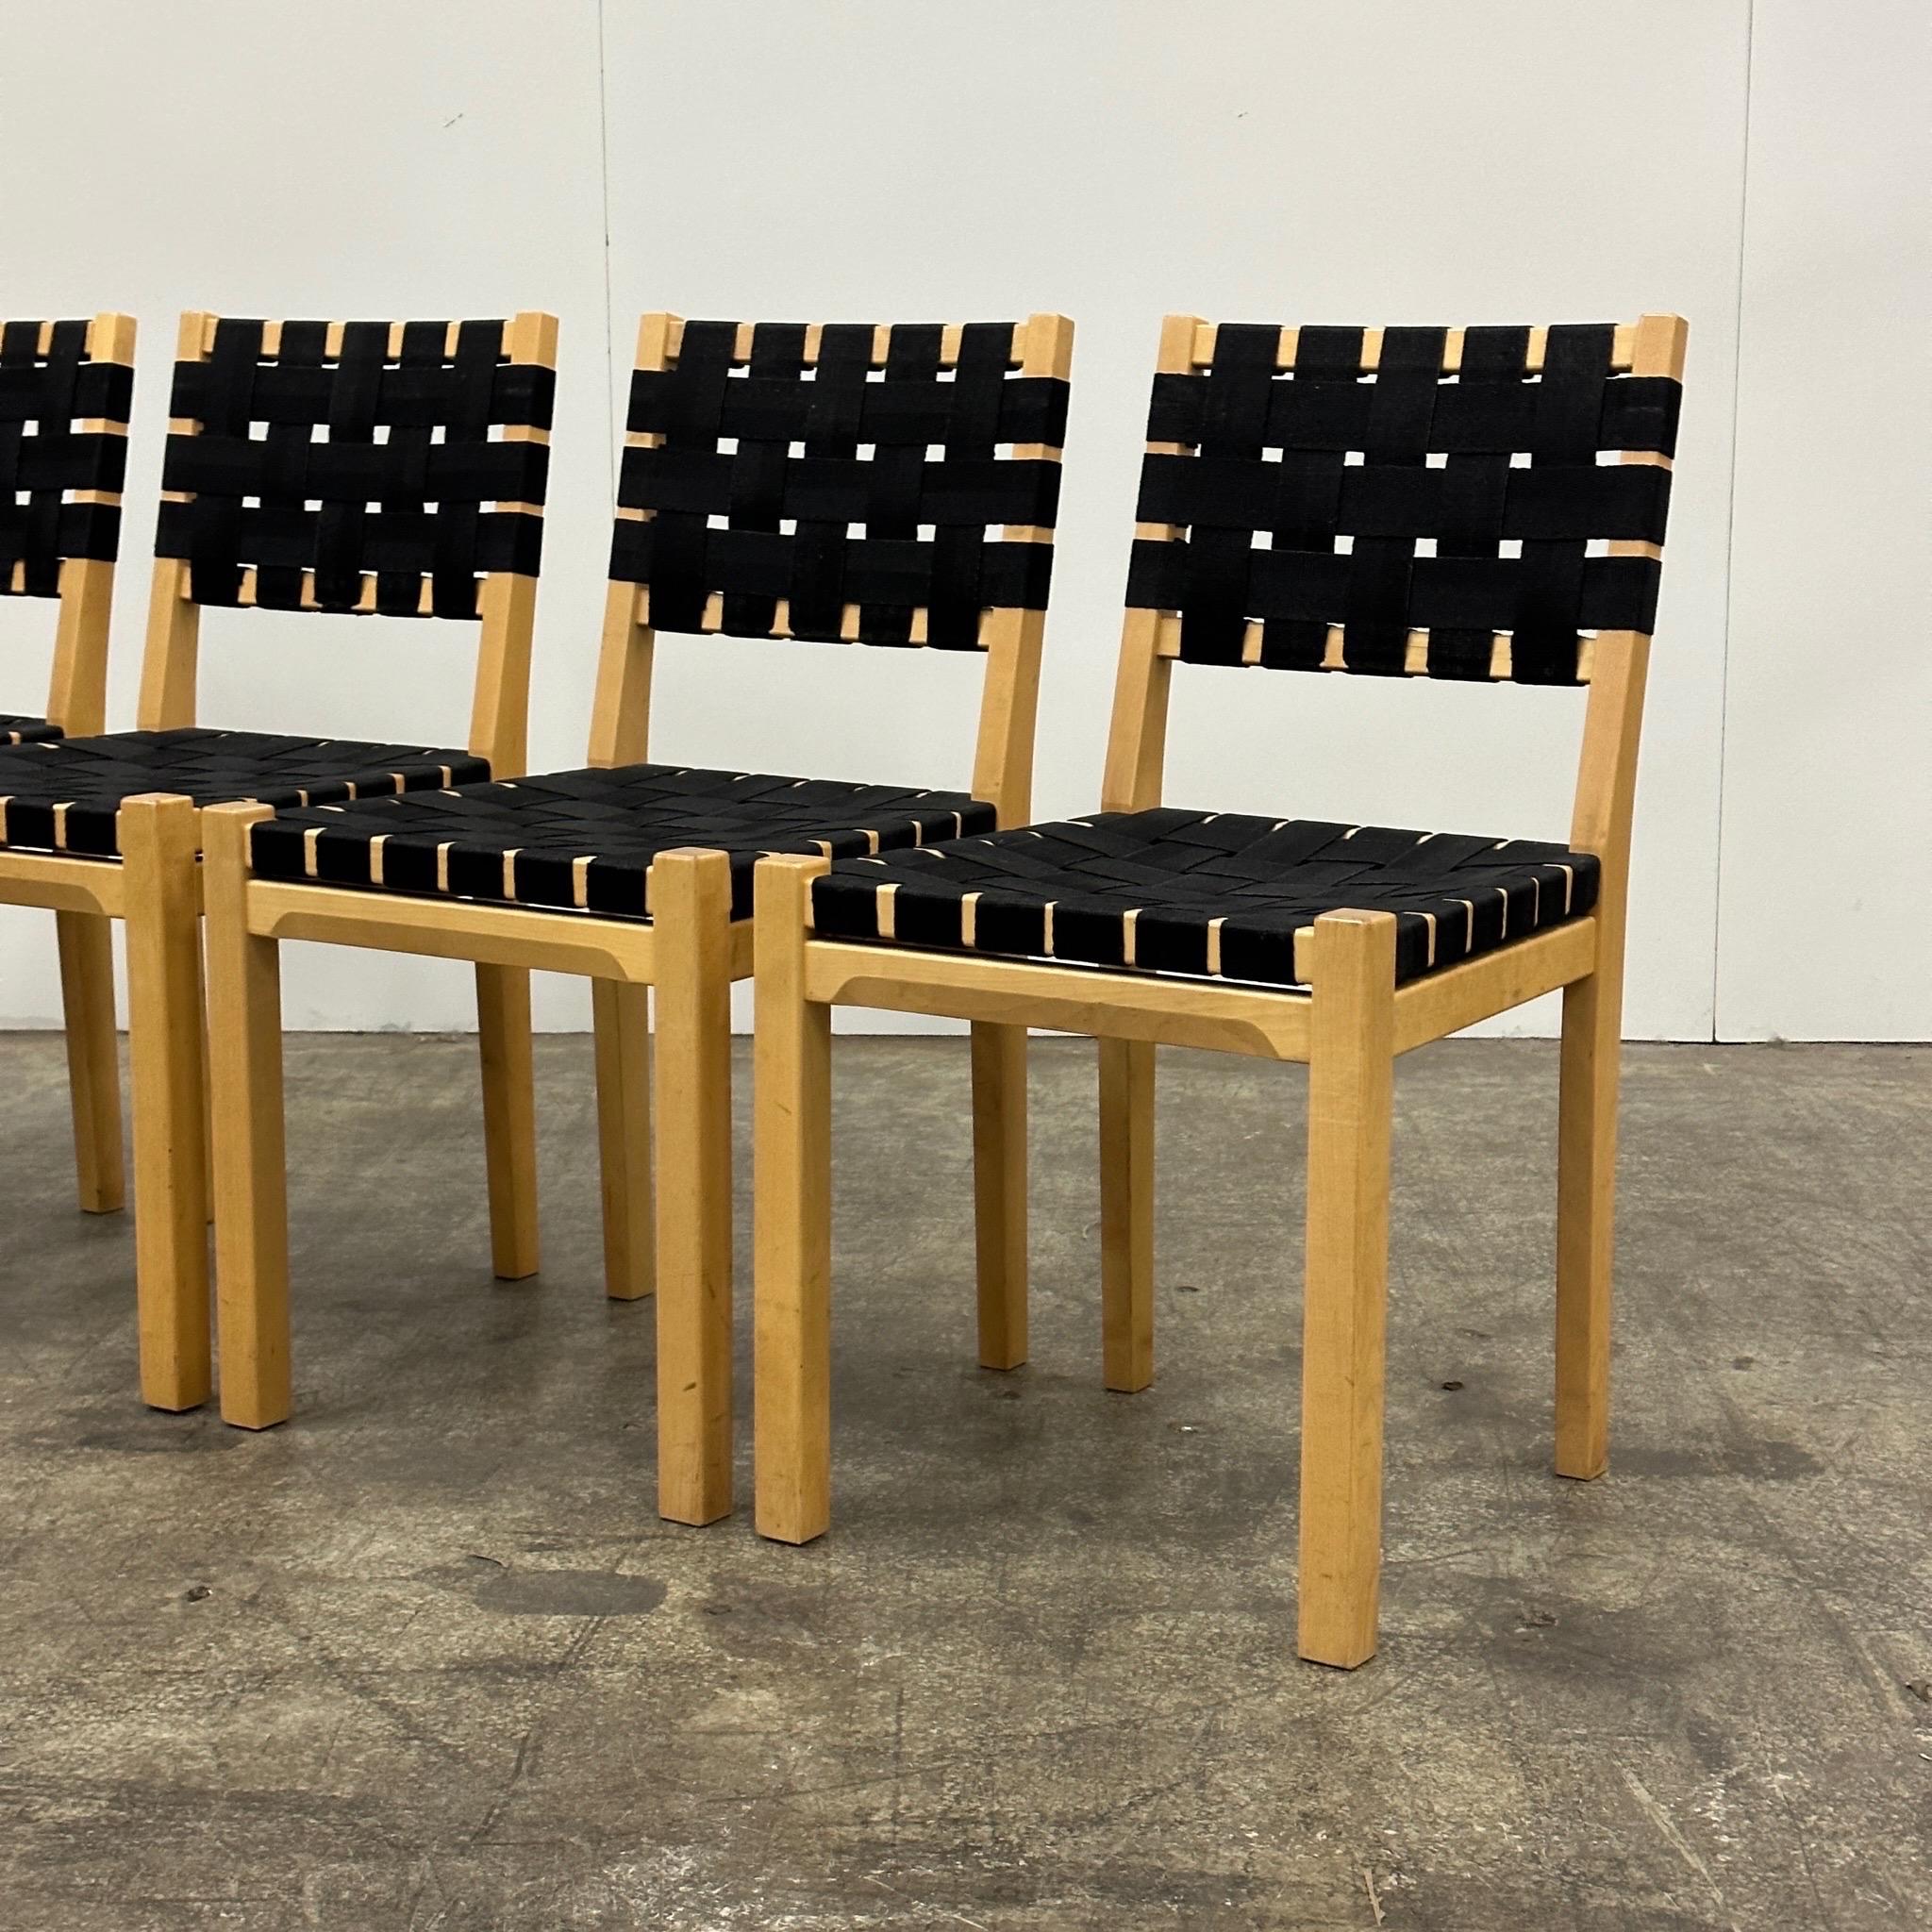 c. 1960s. Price is for the set. Contact us if you'd like to purchase a single item. Rare dining/side chairs made of linen and birch. Made in Finland. Stamped Artek.